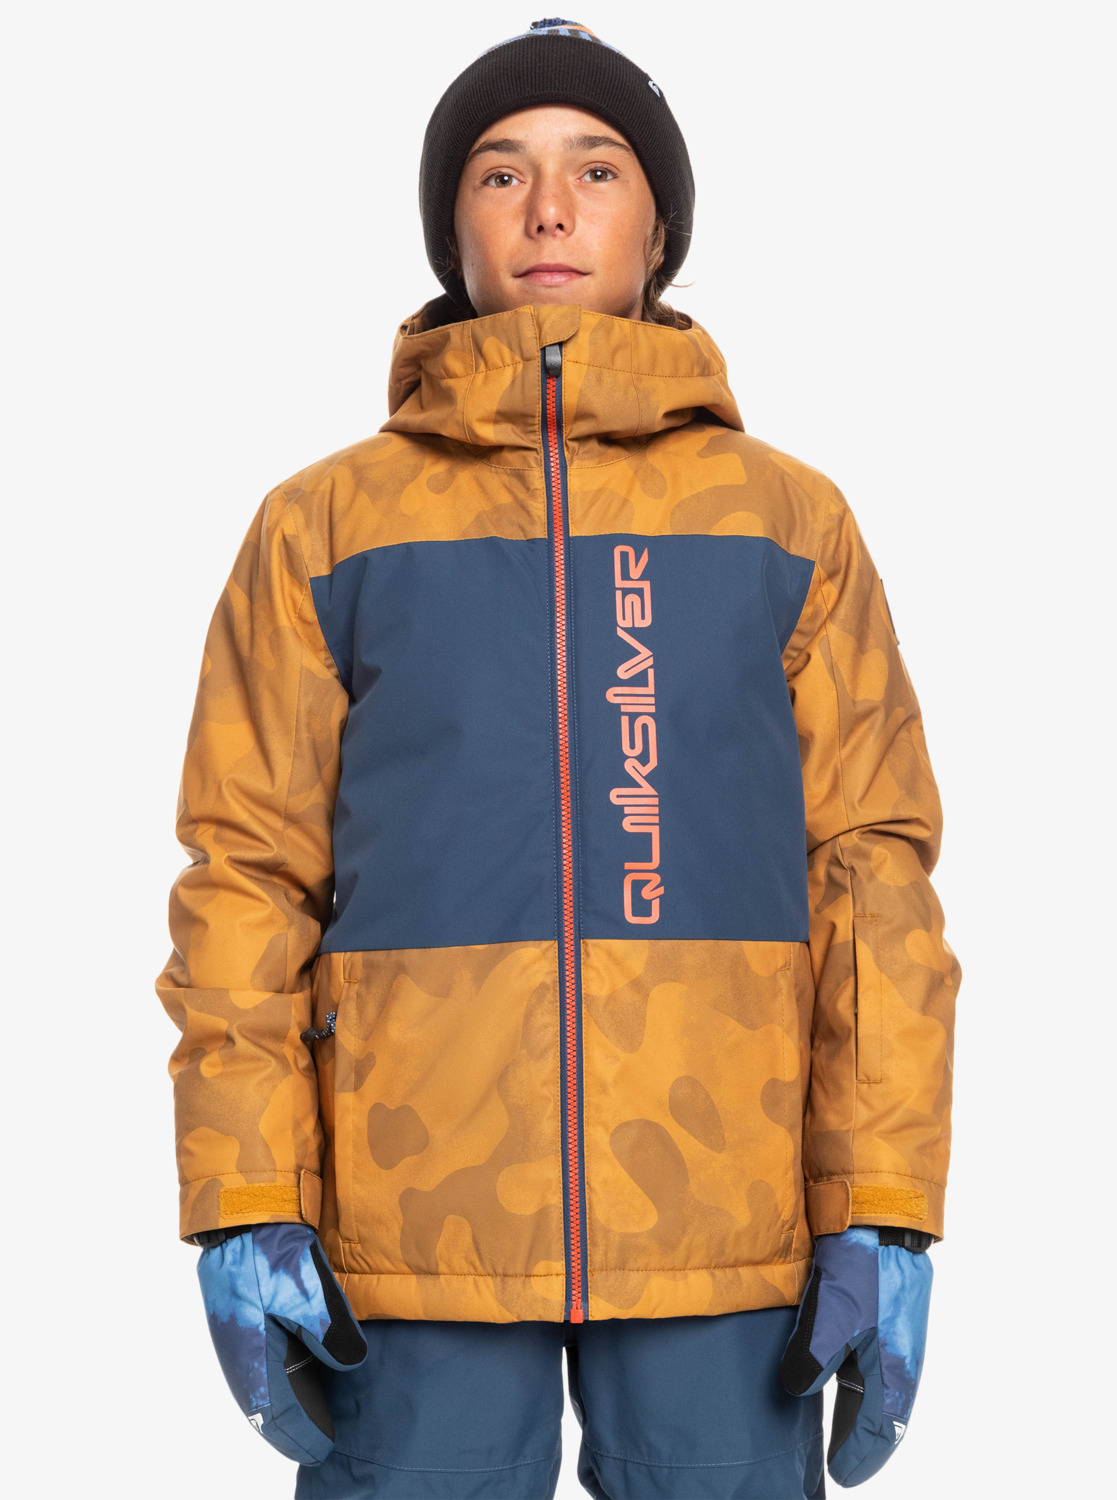 Quiksilver Side Hit Youth Jacket - Fade Out Camo: Neptune Diving & Ski